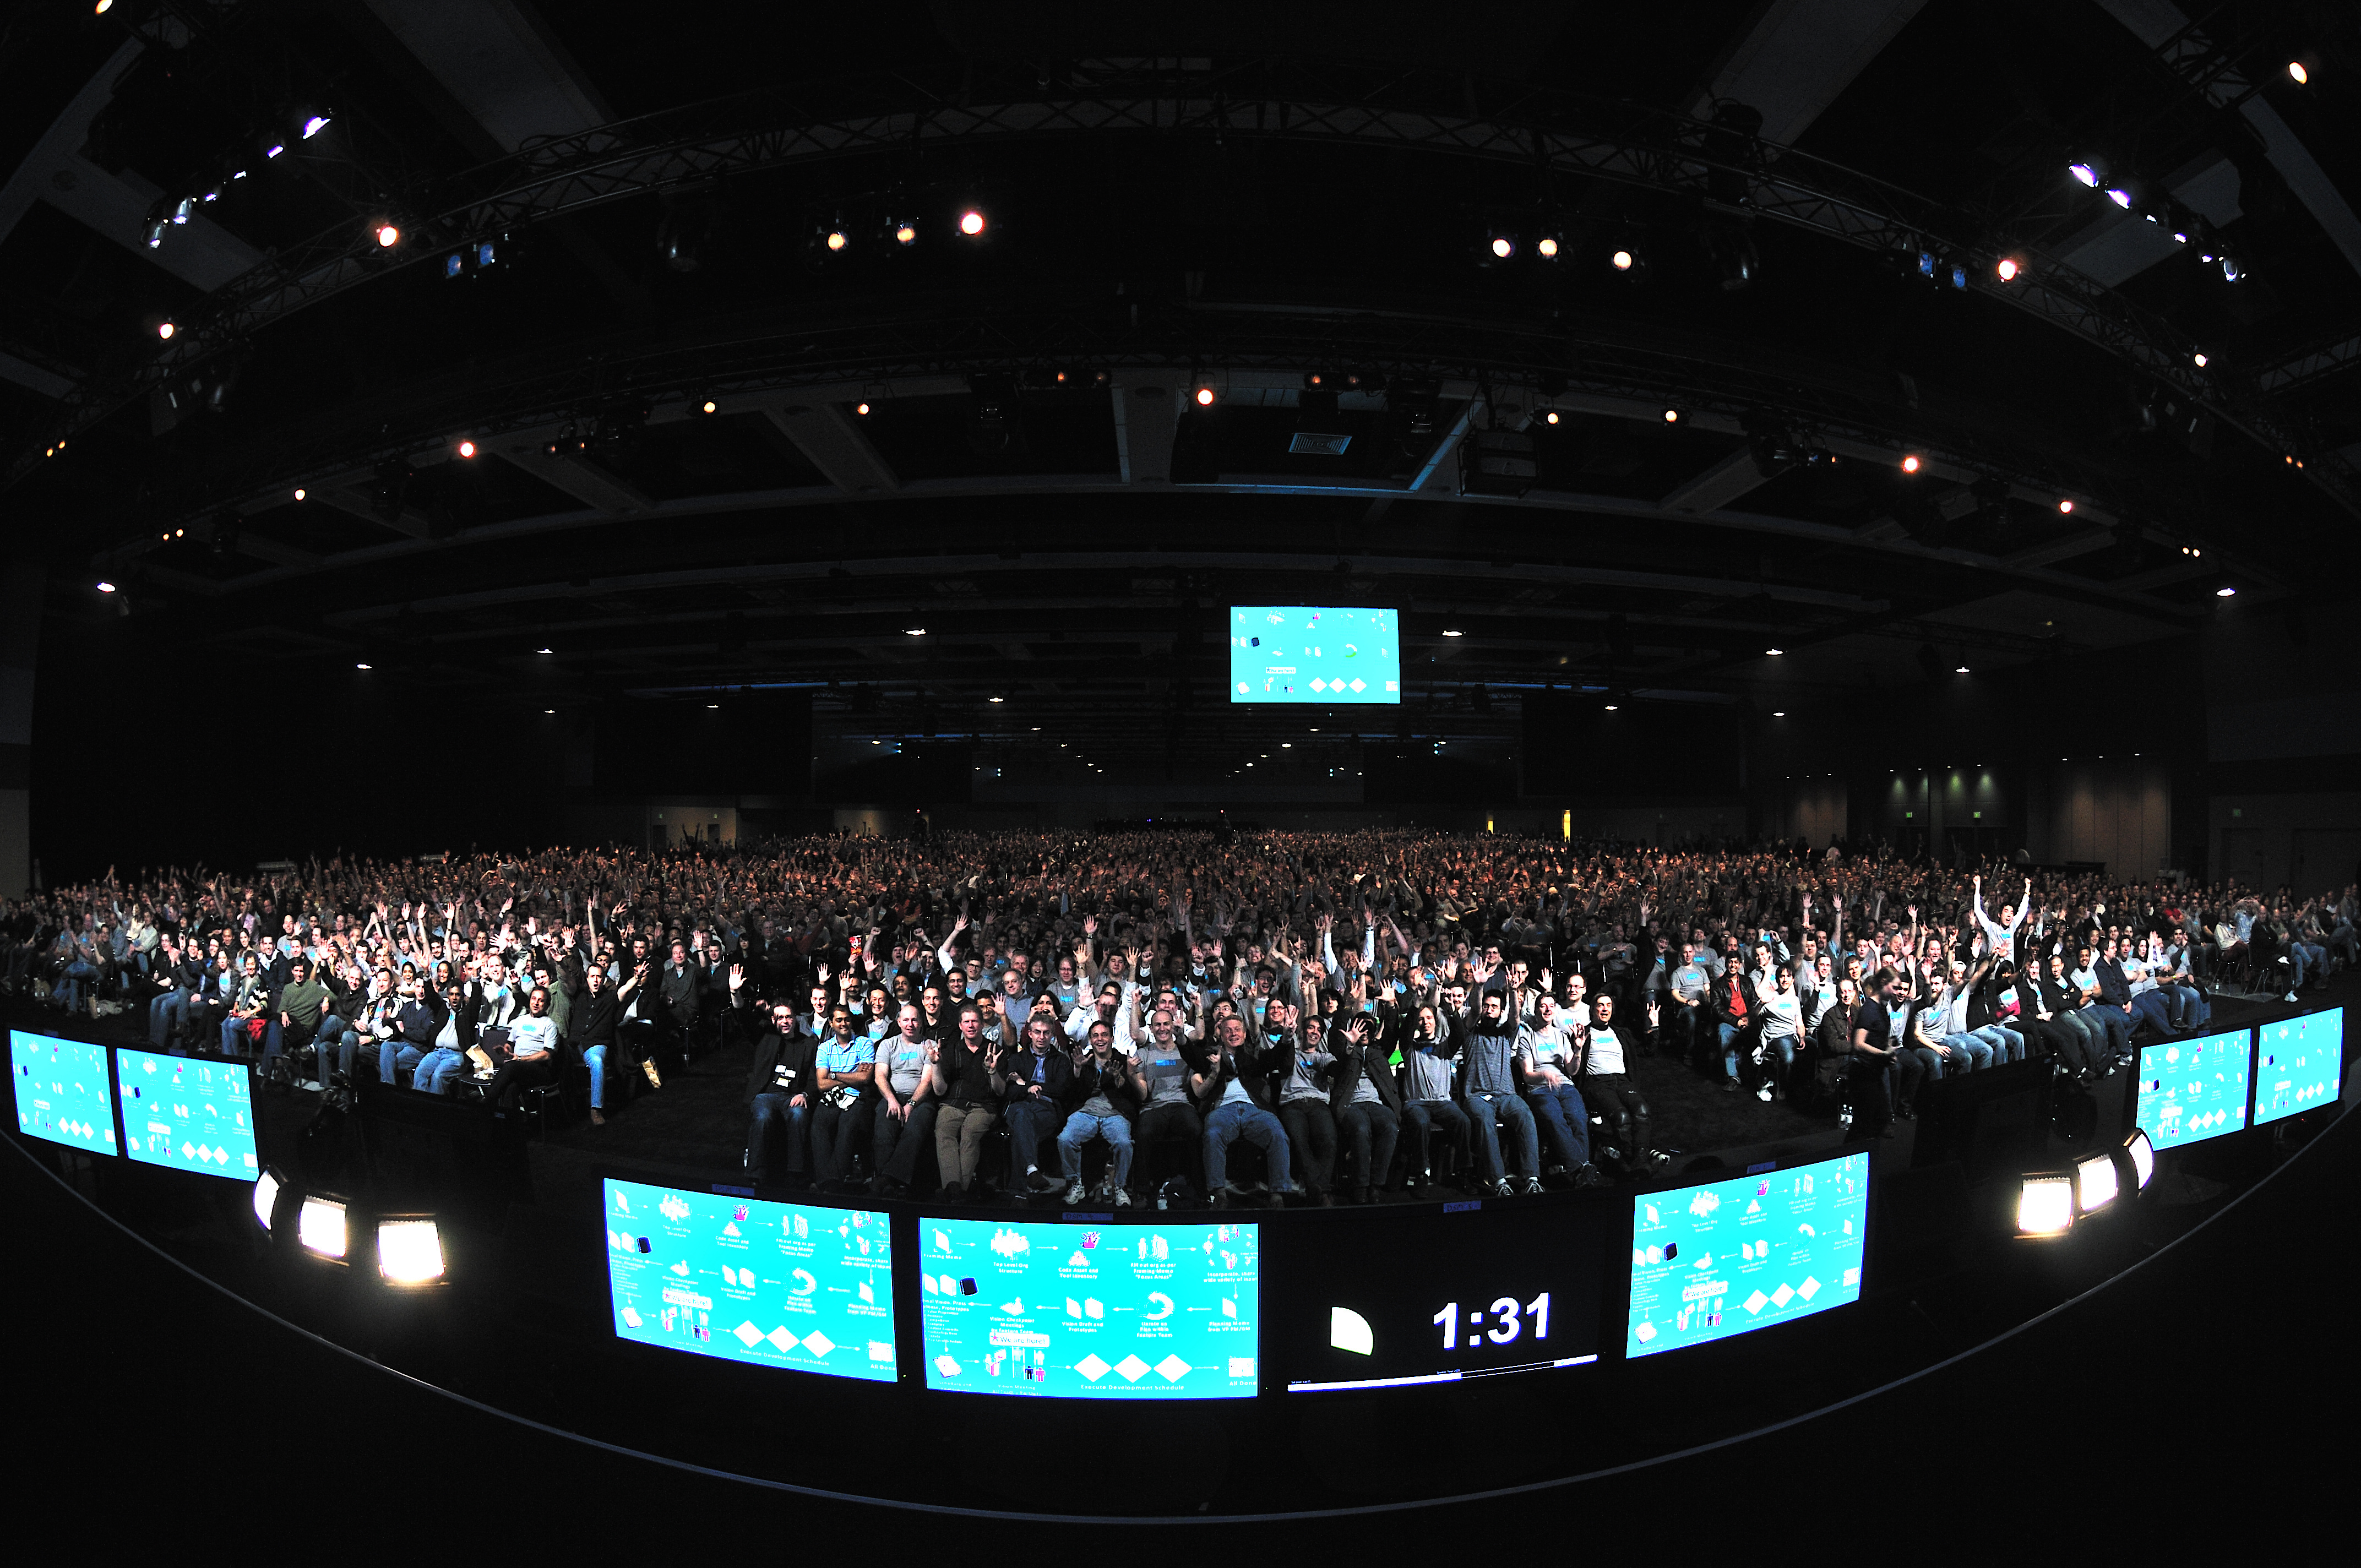 Wide angle photograph of the entire Windows 8 team gathered for the vision meeting in Seattle on March 24, 2010. Photo is taken from the stage.